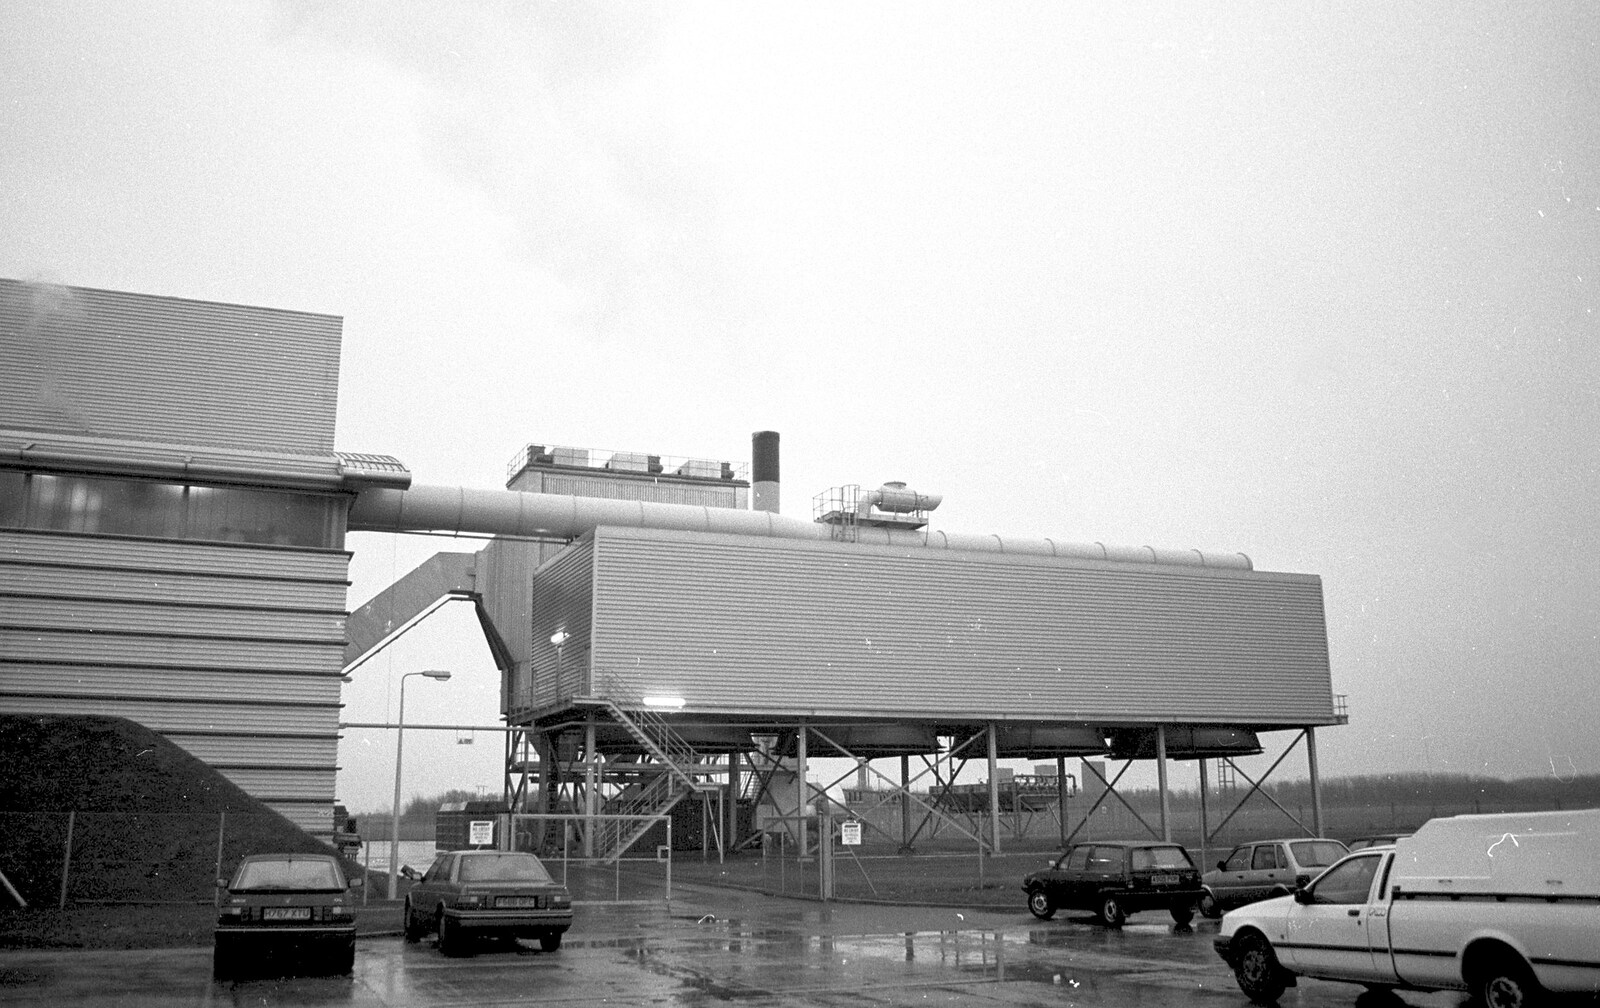 The World's First "Chicken Shit" Power Station, Brome, Eye, Suffolk - 11th July 1992: An outside view of the power station's cooling section